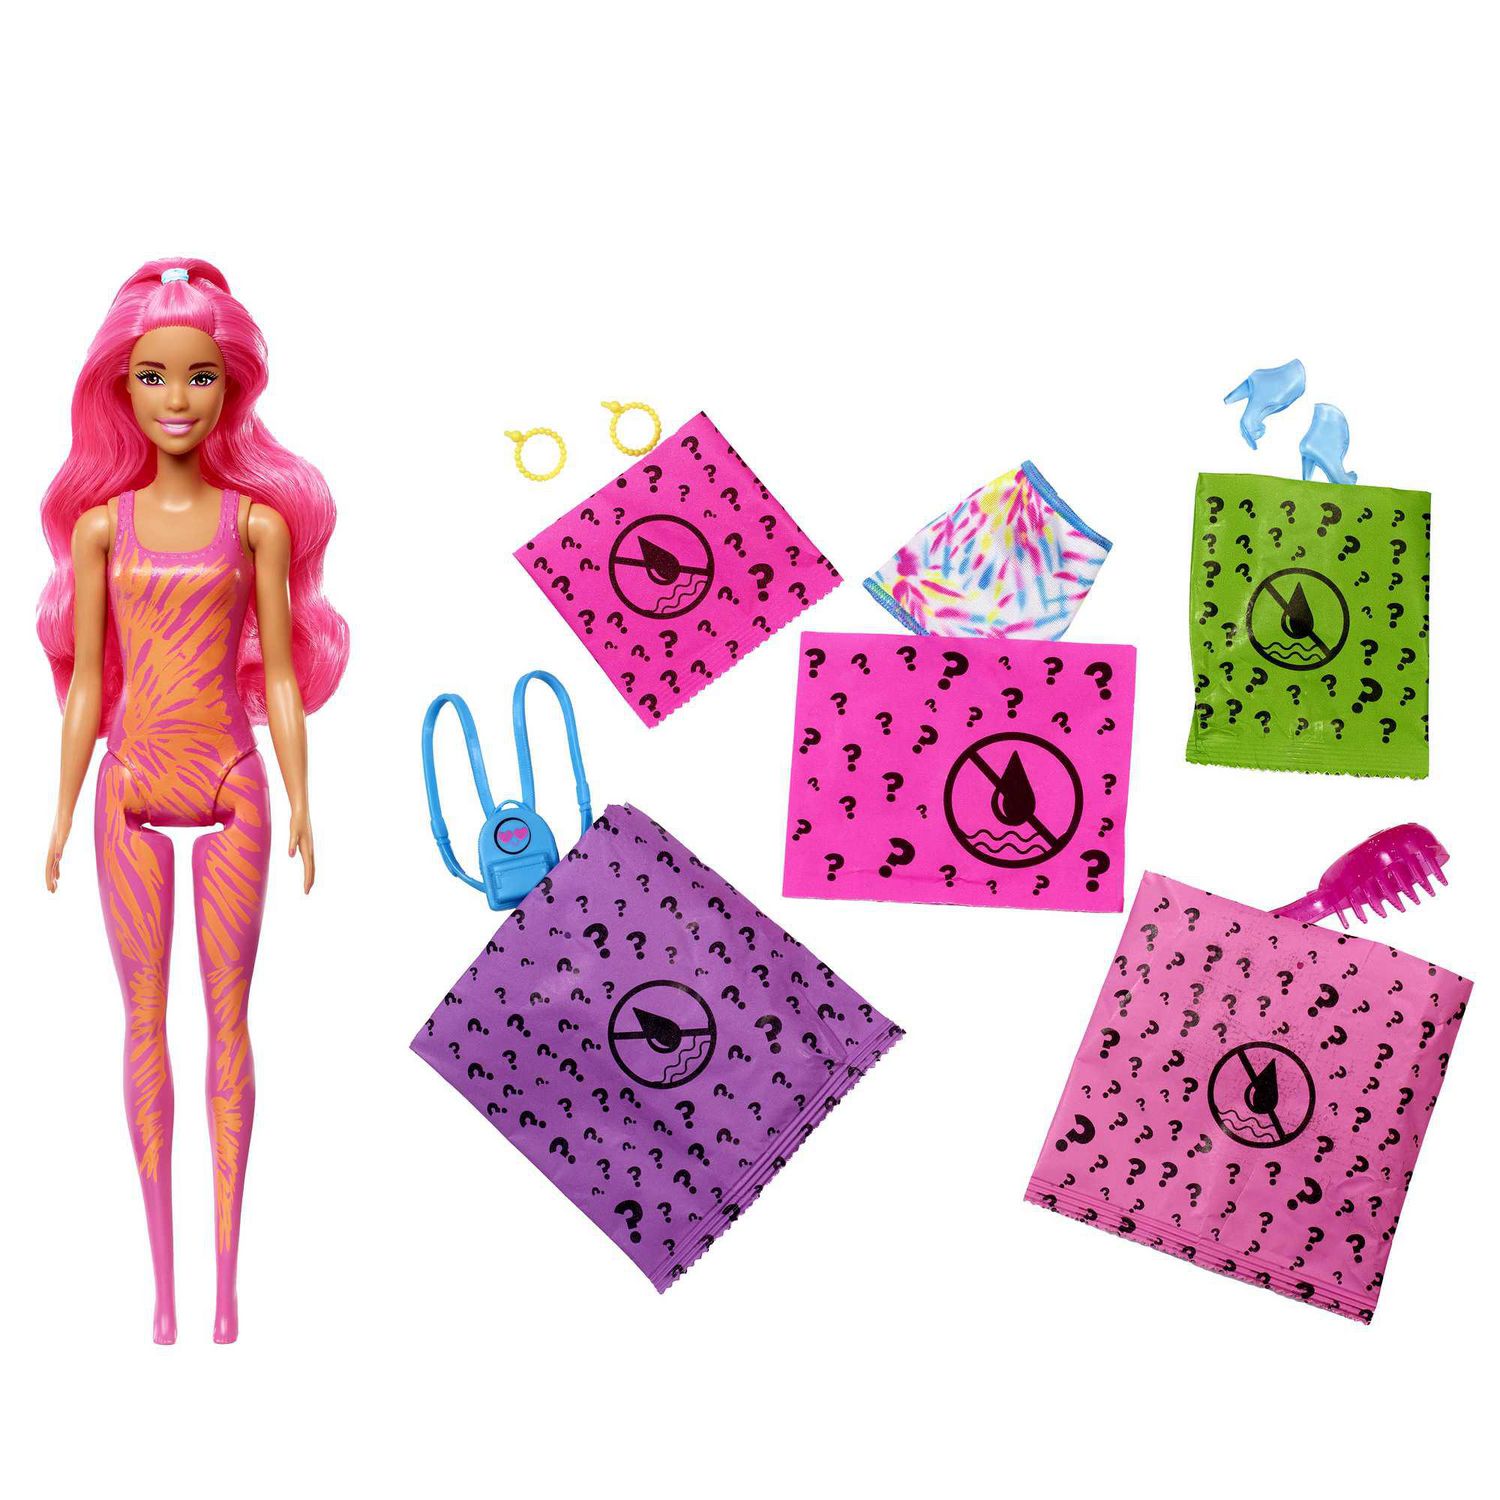 Barbie Color Reveal Doll with 7 Surprises, Neon Tie-Dye Series